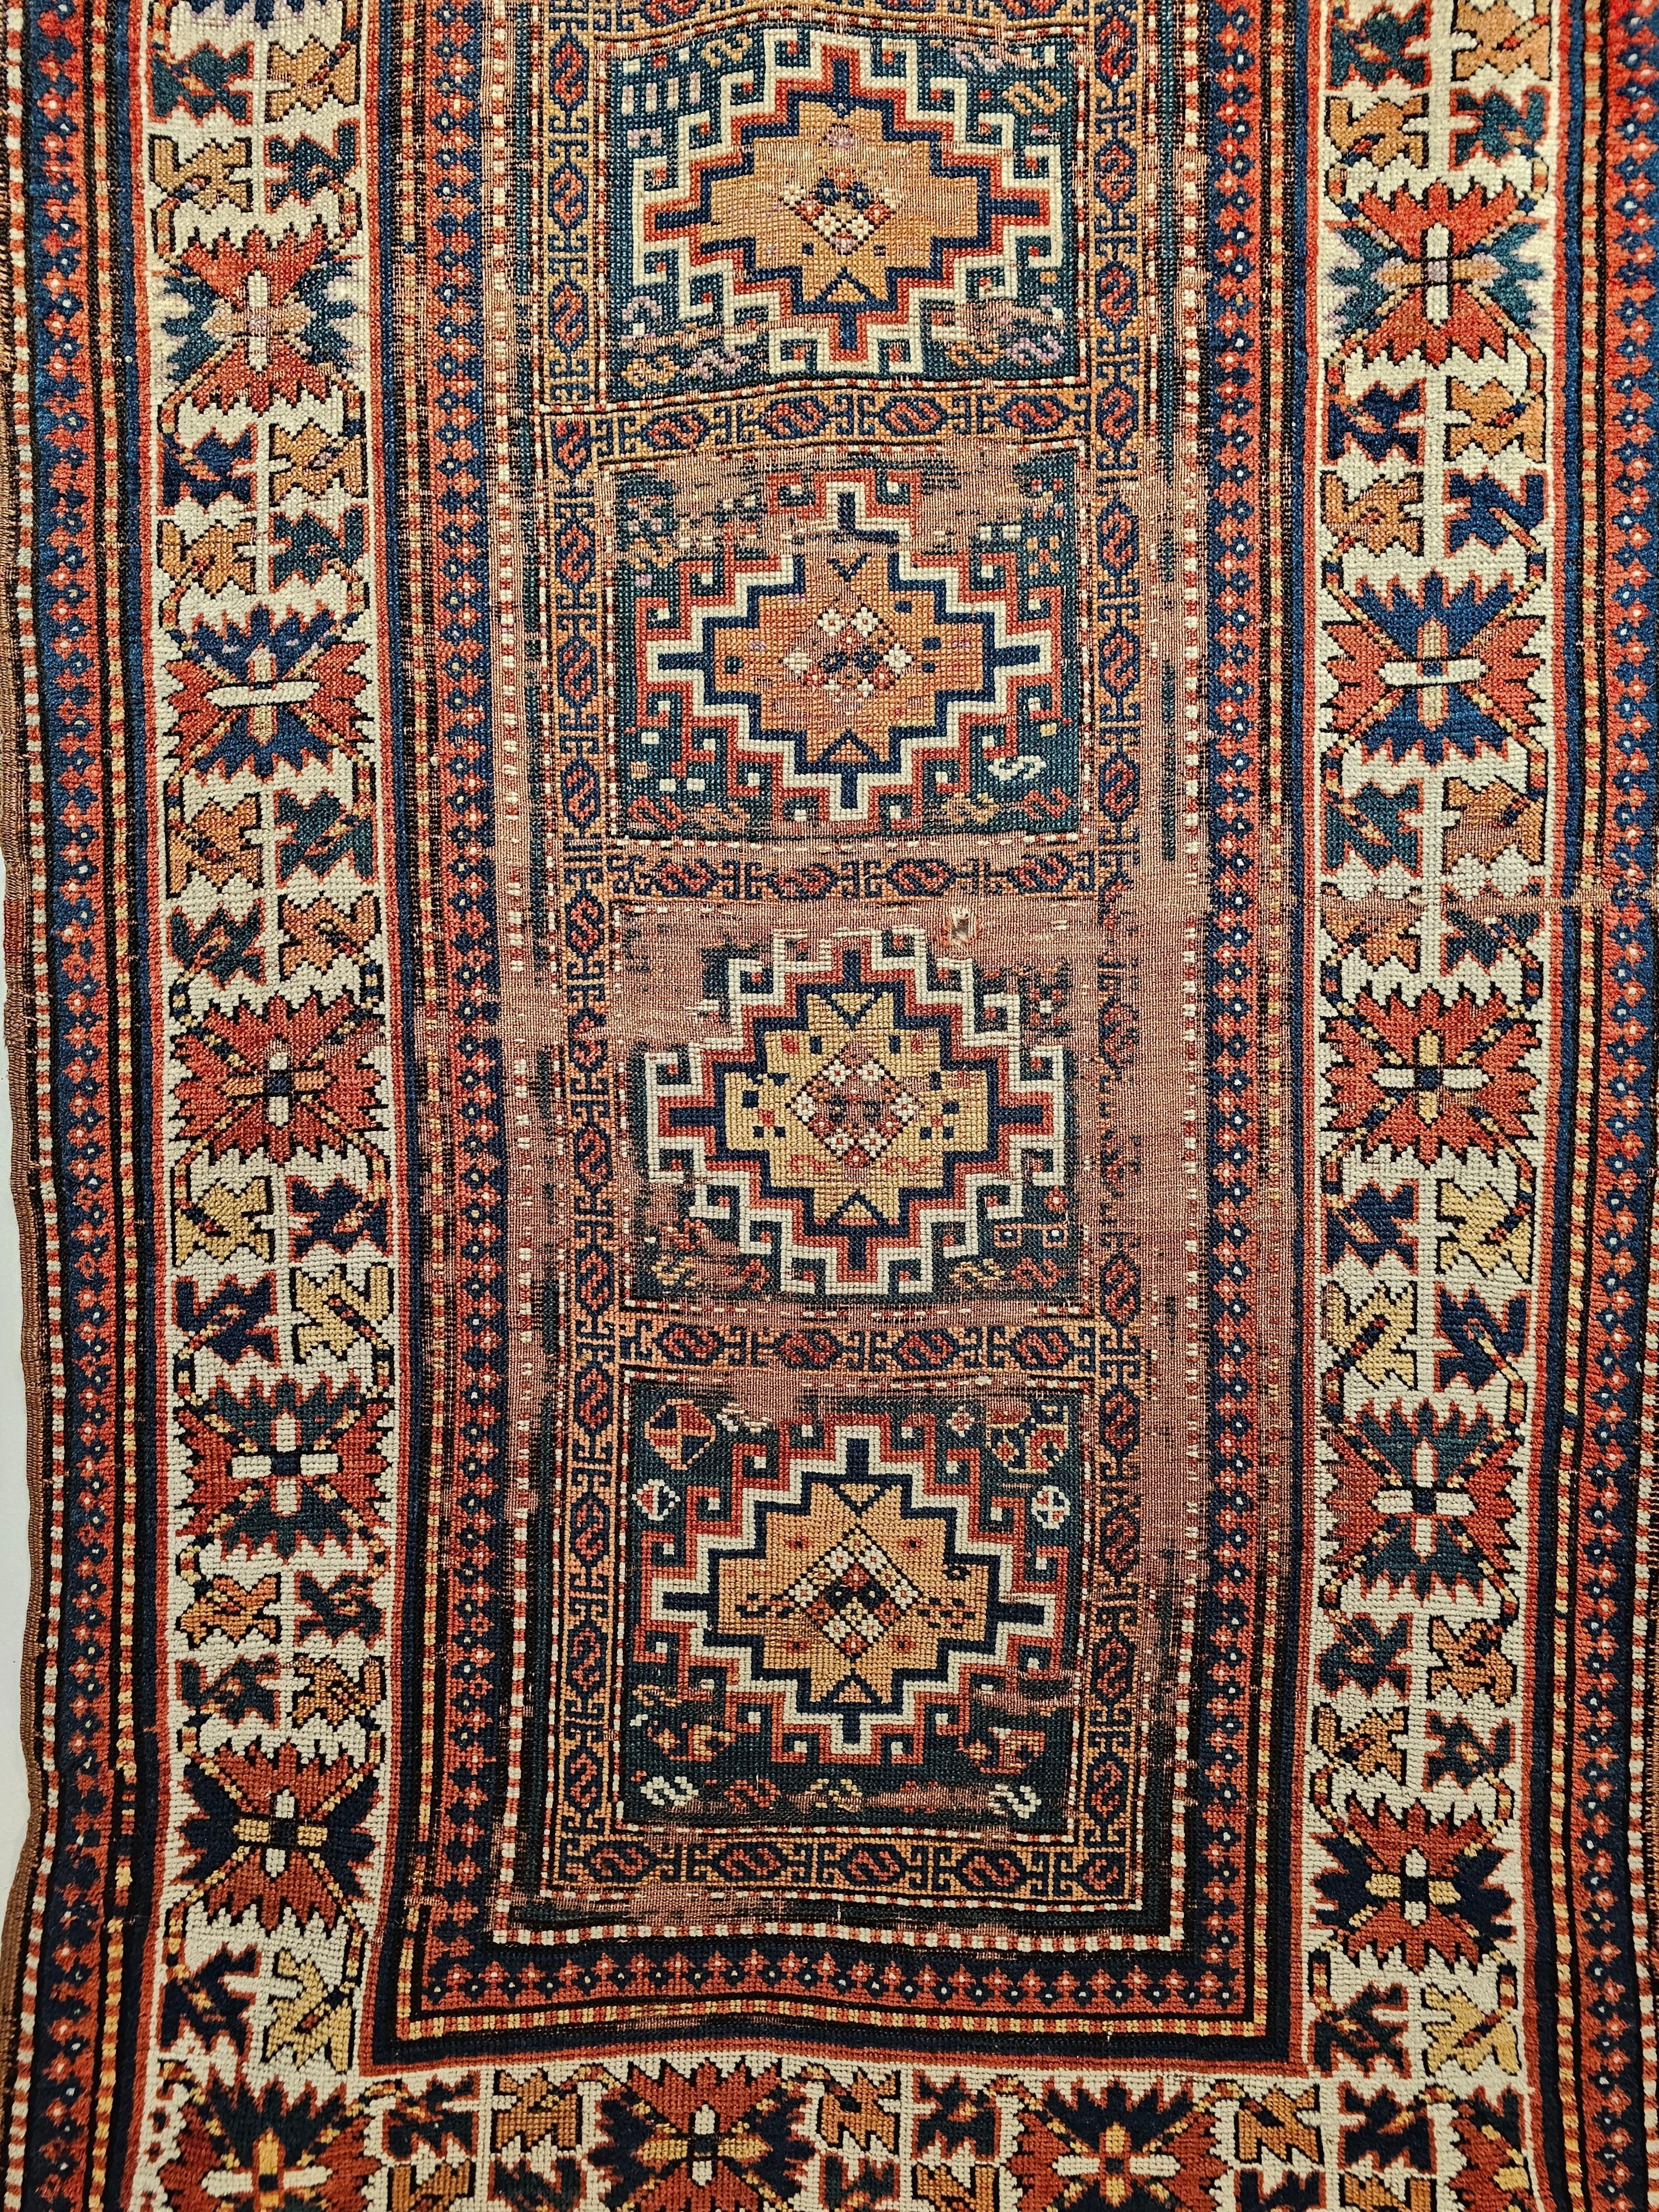 19th Century Caucasian Kazak in “Memling Gul” pattern in French Blue, Ivory and terracotta colors.  The main design consists of five “Memling Gul” medallions in a column each set in a French blue background. The medallion colors include brick red